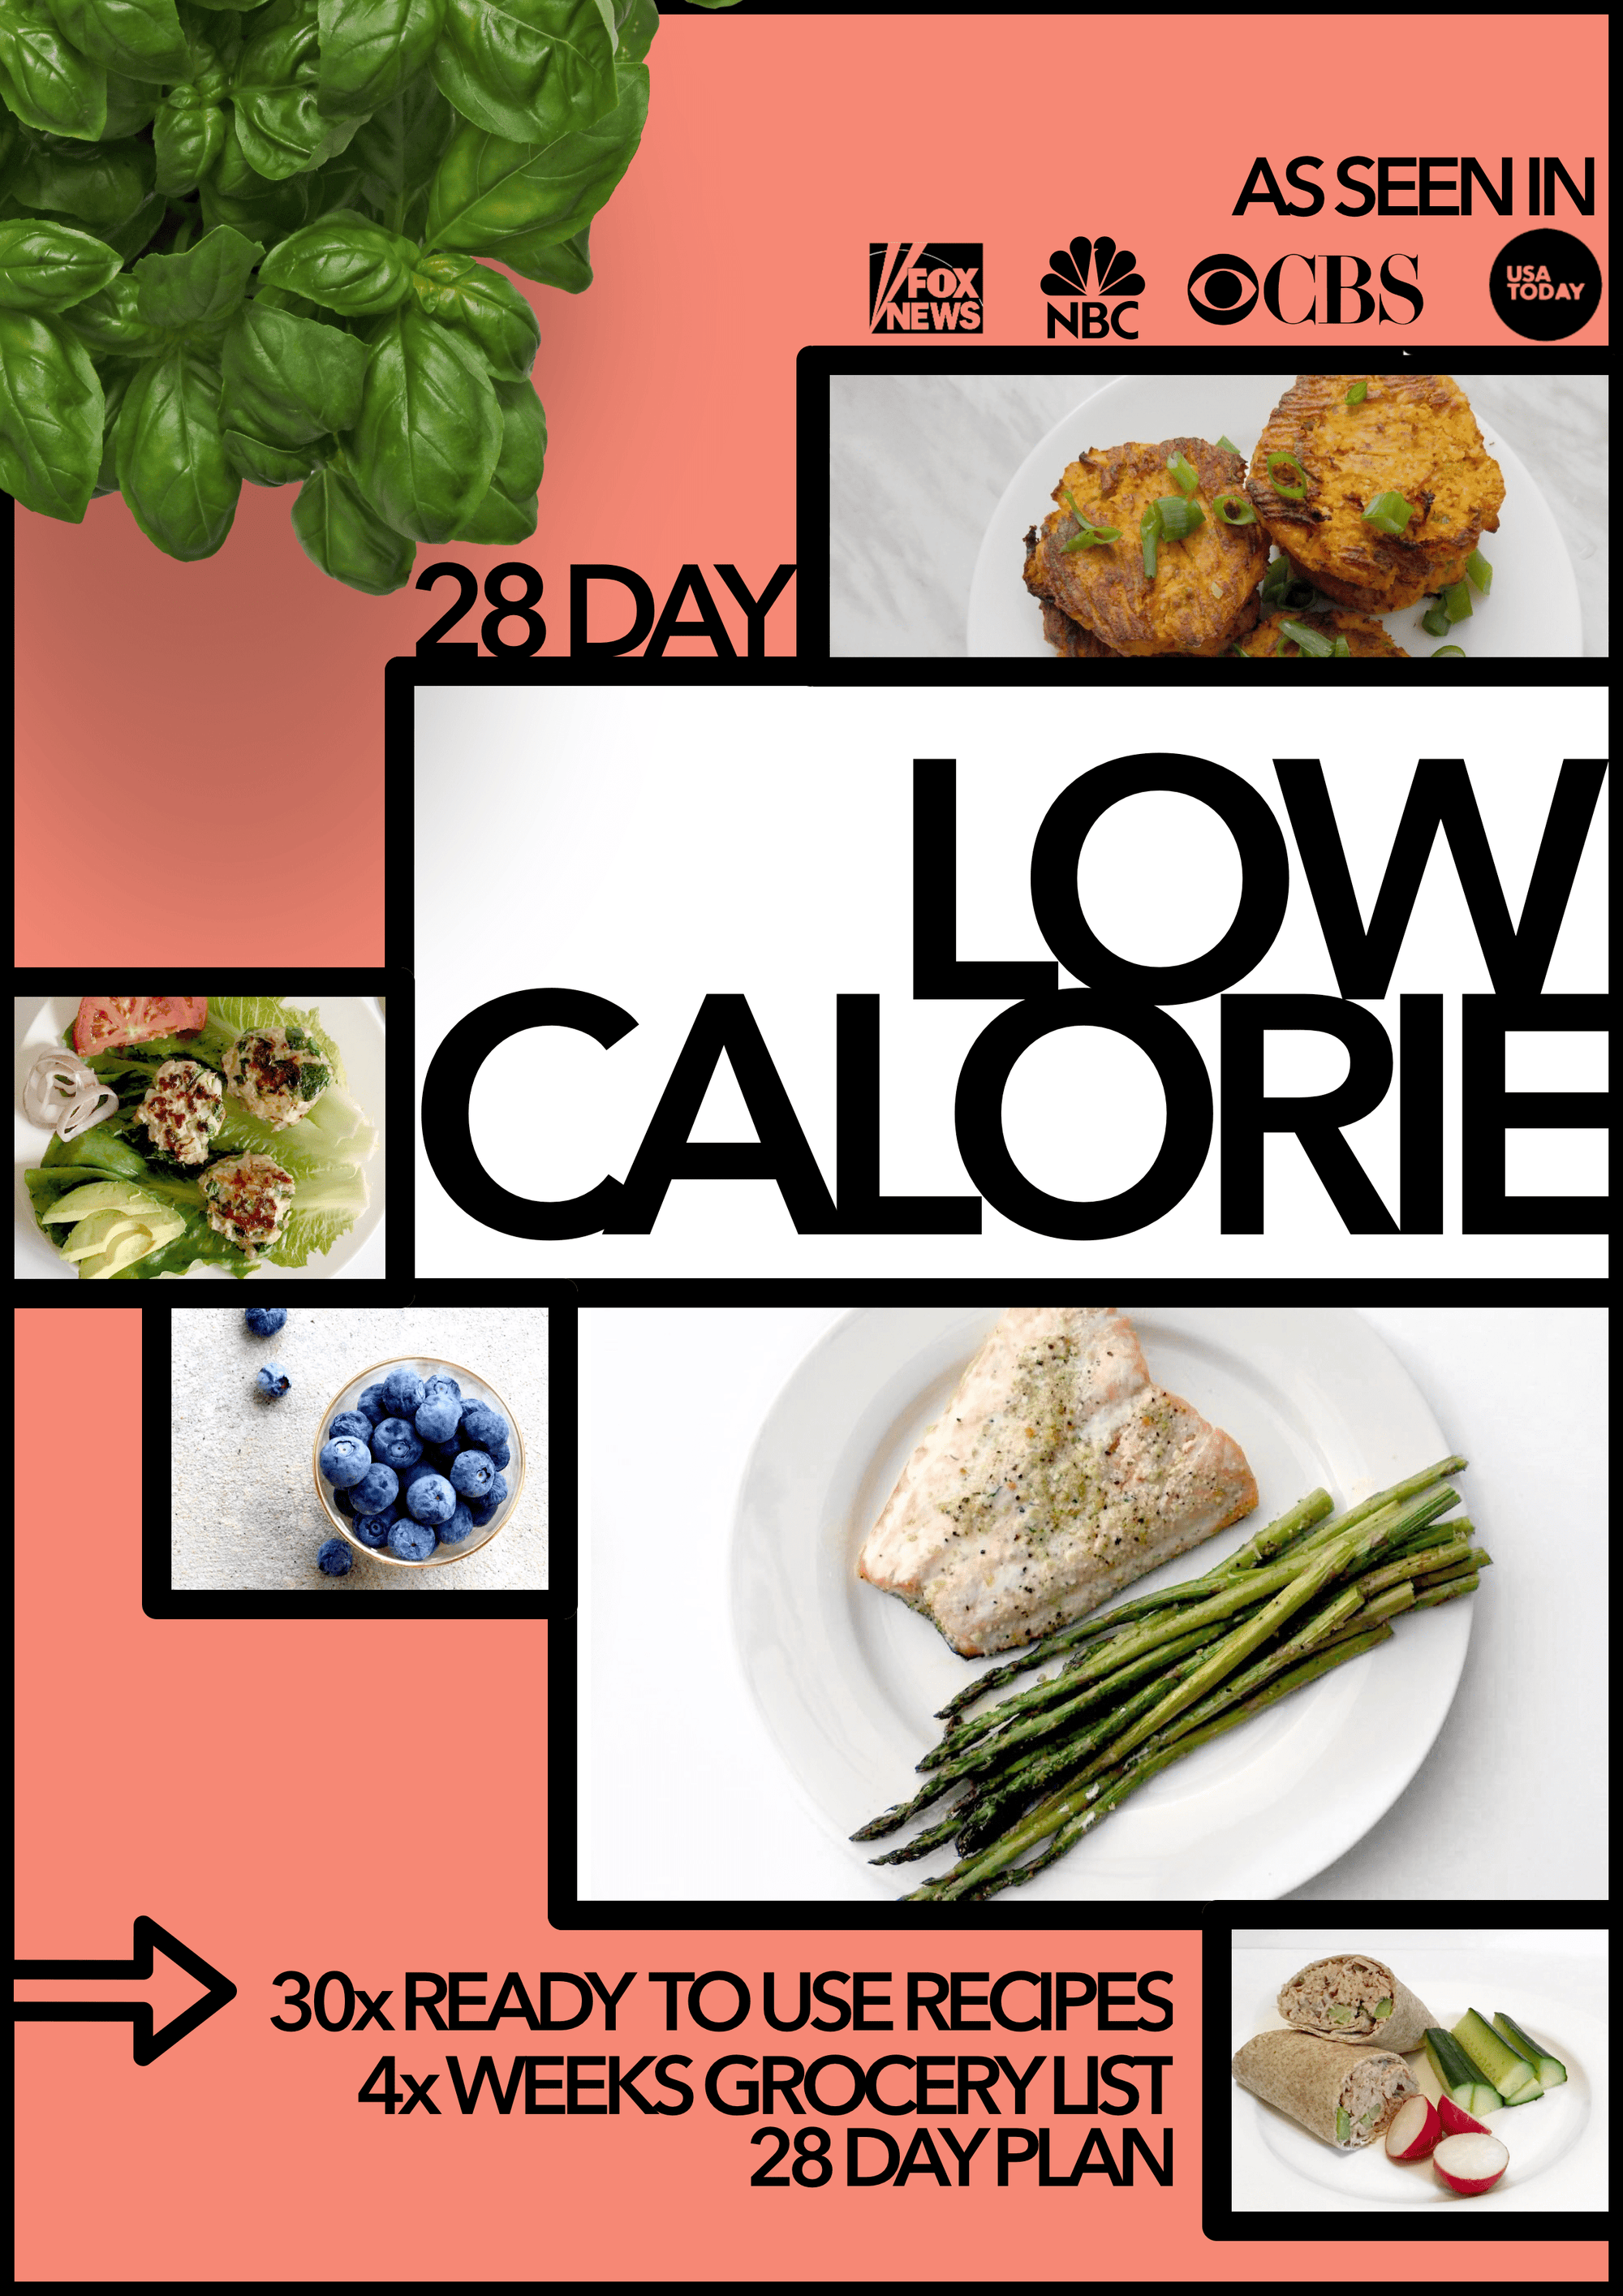 Spartan Fit Nutrition 28 Day 1500 Low Calorie Diet Guide for movement muscle mood and motivation